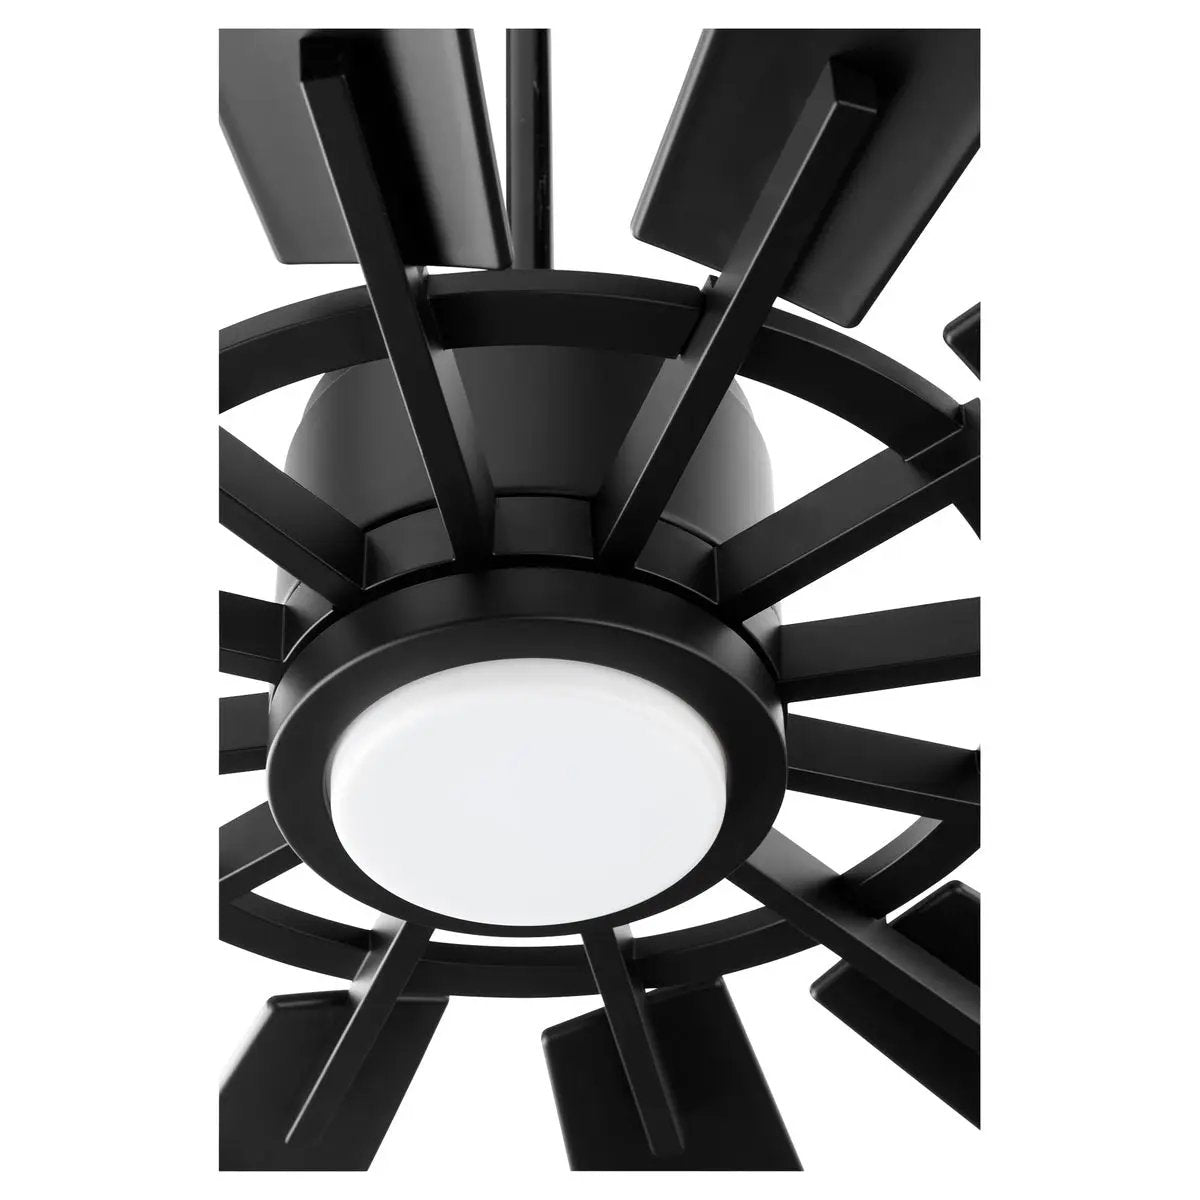 Outdoor Ceiling Fan with Light: A black fan with a multi-blade system attached to a dark chromatic housing motor. Designed for high-performance outdoor air circulation.